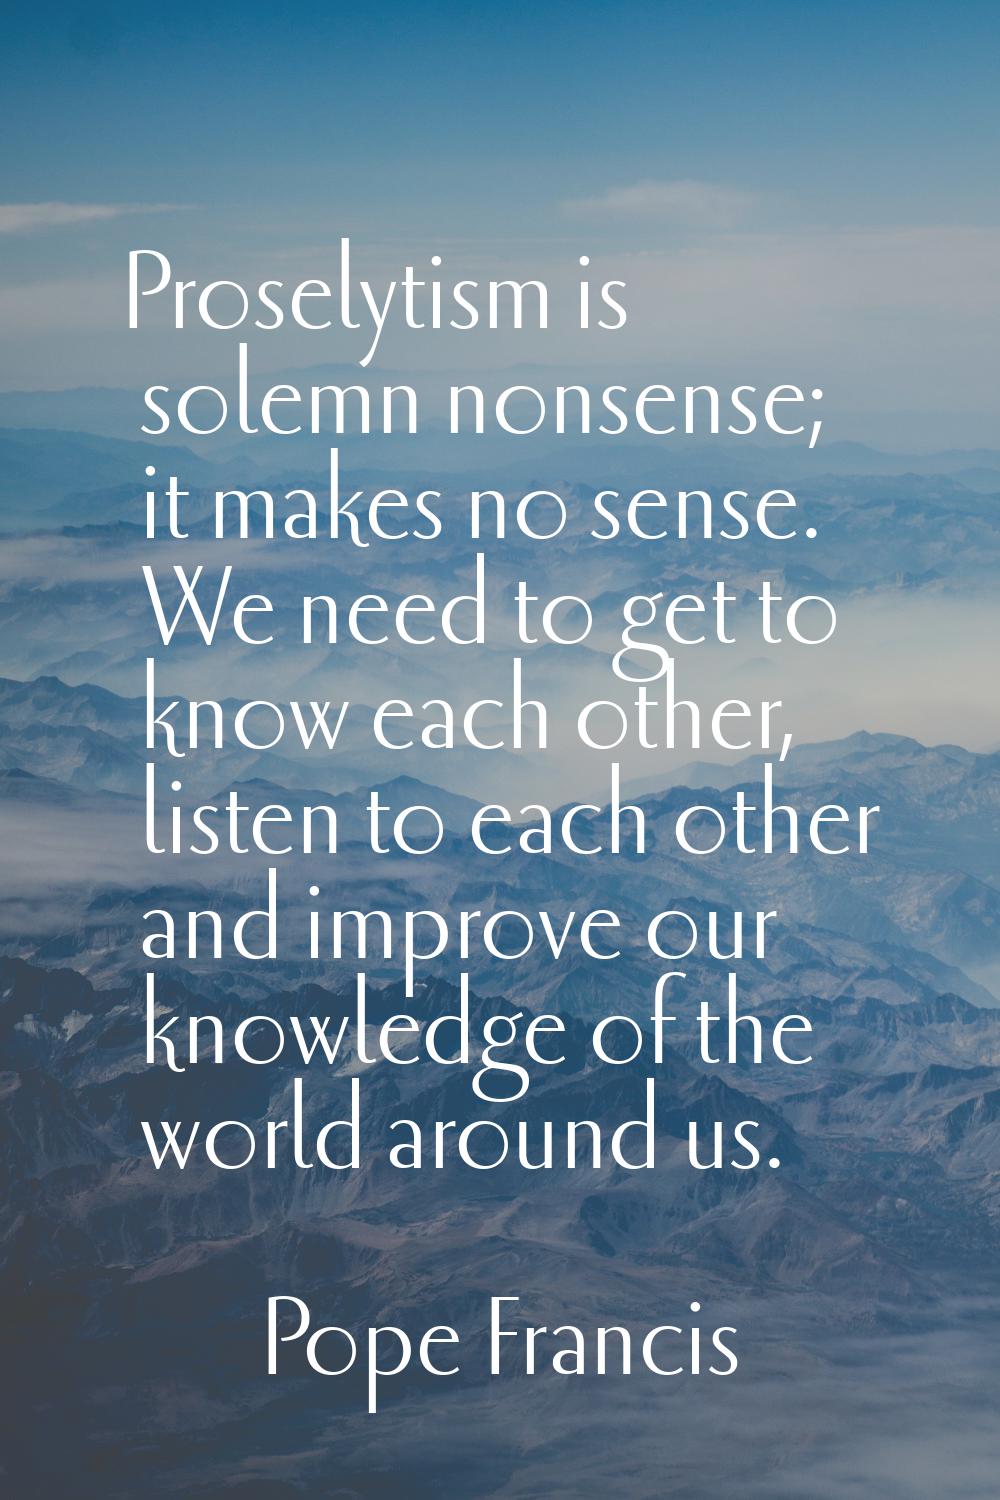 Proselytism is solemn nonsense; it makes no sense. We need to get to know each other, listen to eac